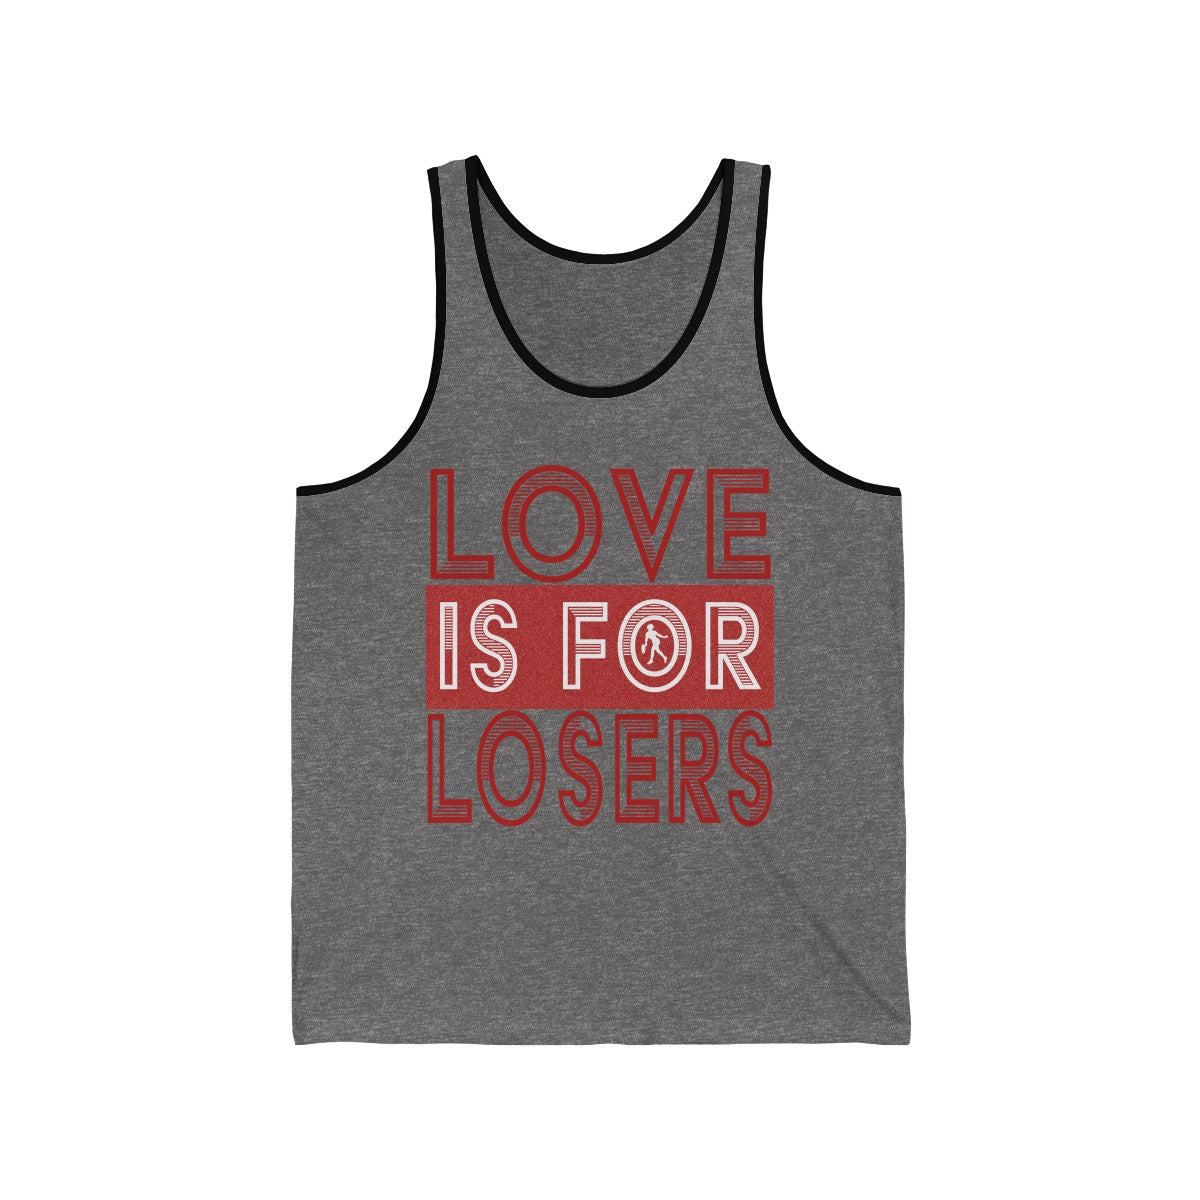 Love Is For Losers Funny Tennis Score Tank Top With Vintage Female Tennis Player